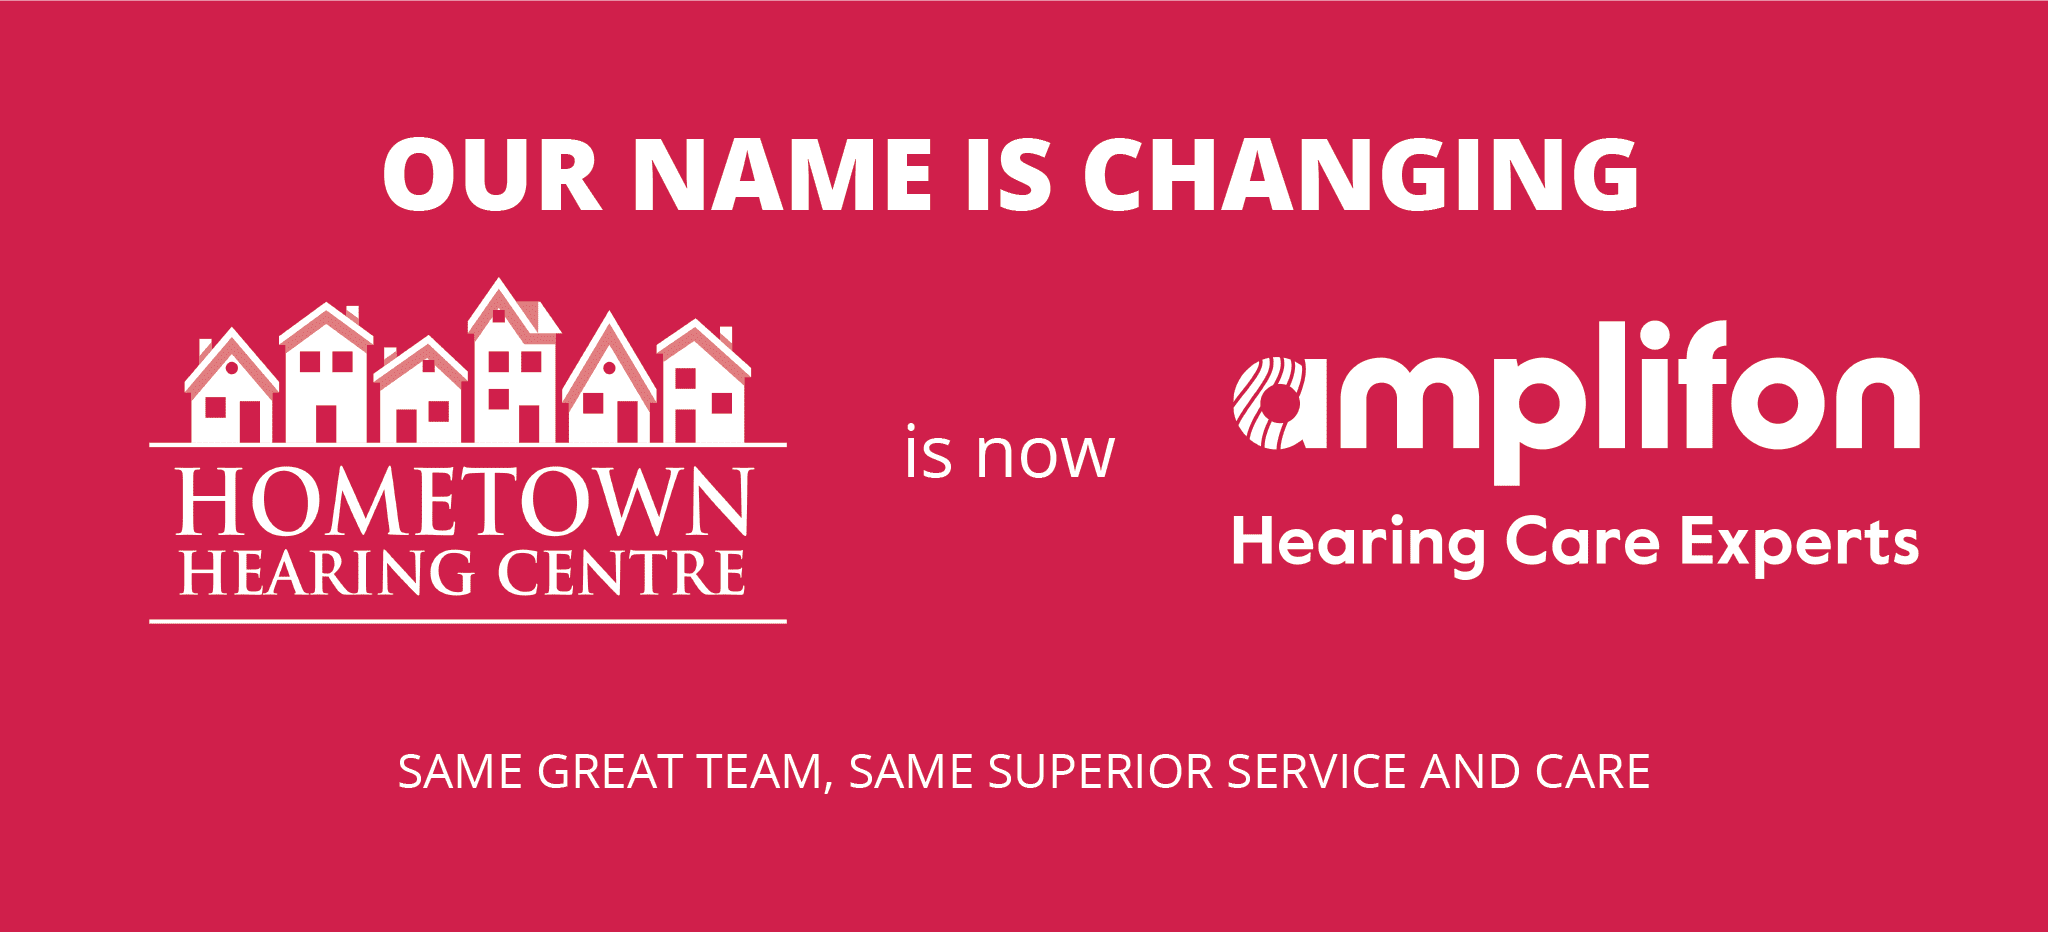 Hometown Hearing Centre team image